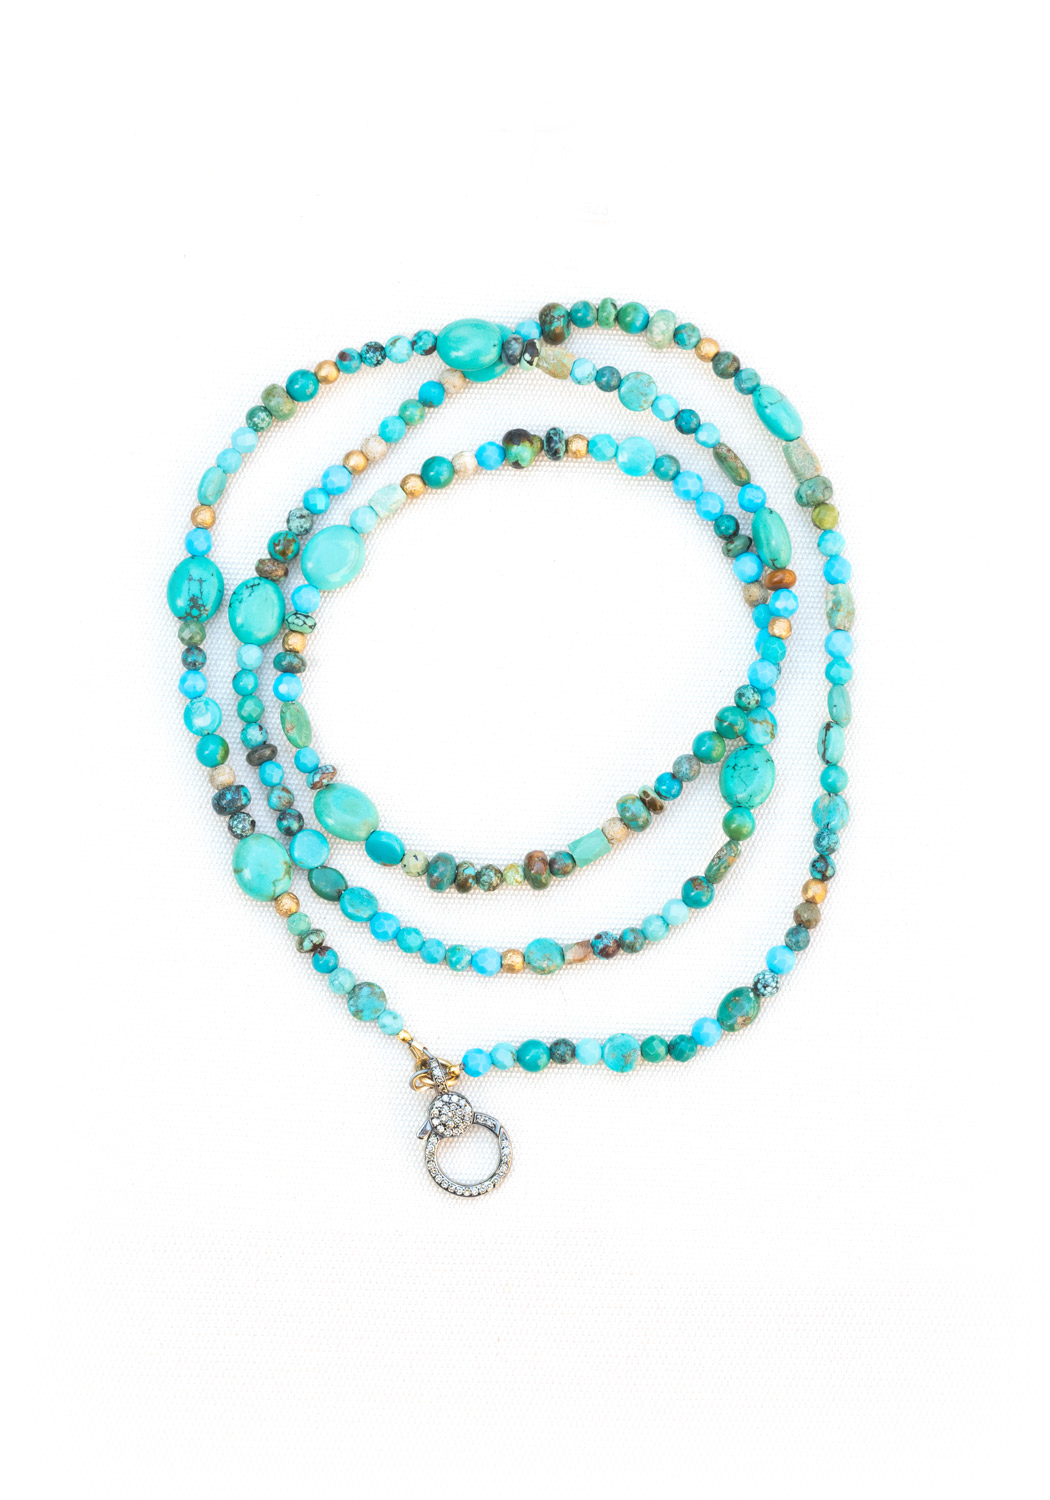 Catherine Michiels Pili Turquoise Bead Necklace with Diamond Clasp | OsterJewelers.com